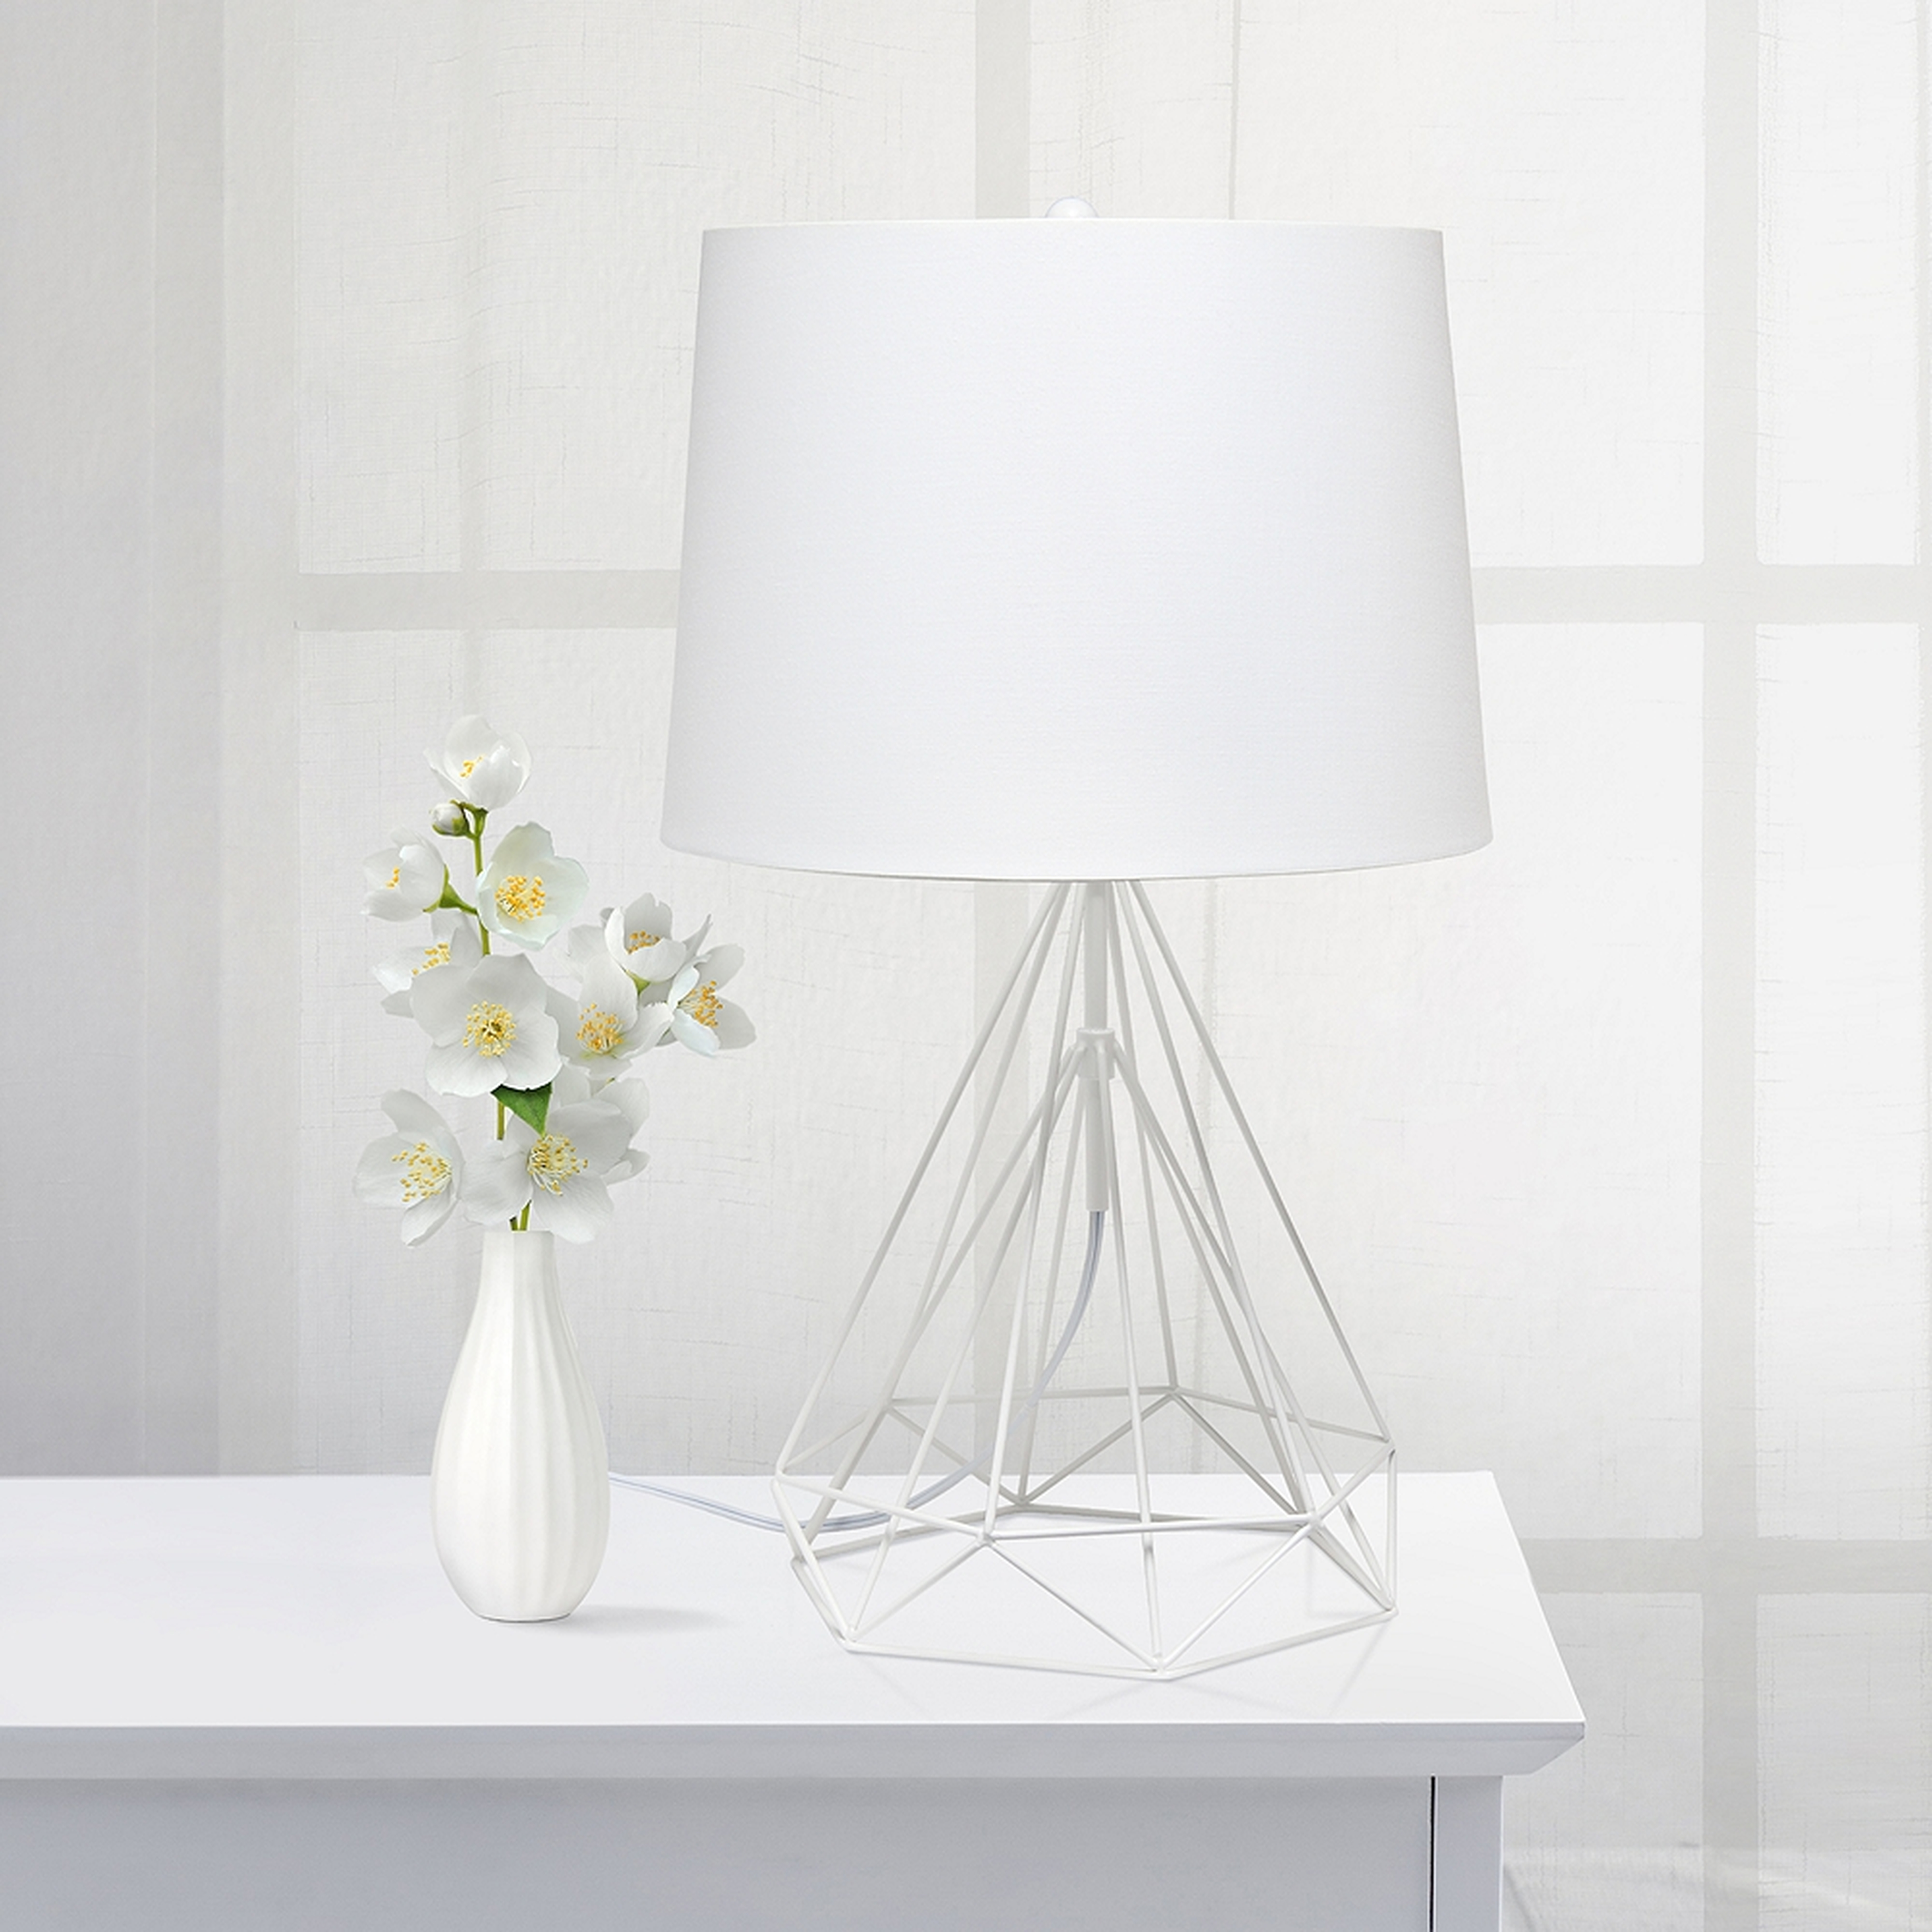 Lalia Home Matte White Geometric Wired Accent Table Lamp - Style # 89D81 - Lamps Plus